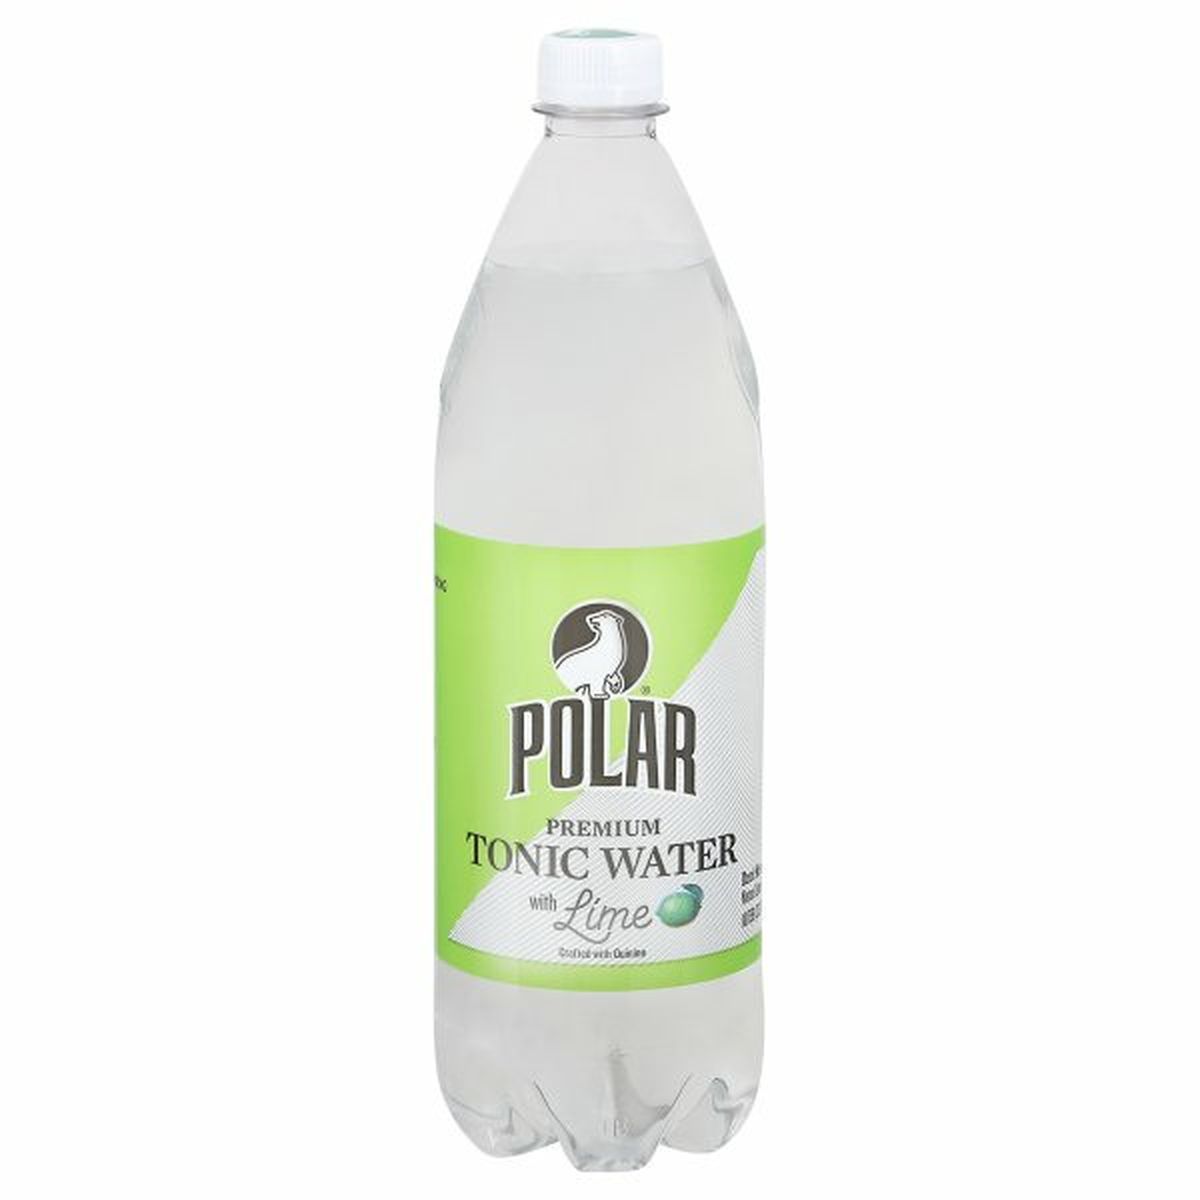 Calories in Polar Tonic Water with Lime, Premium